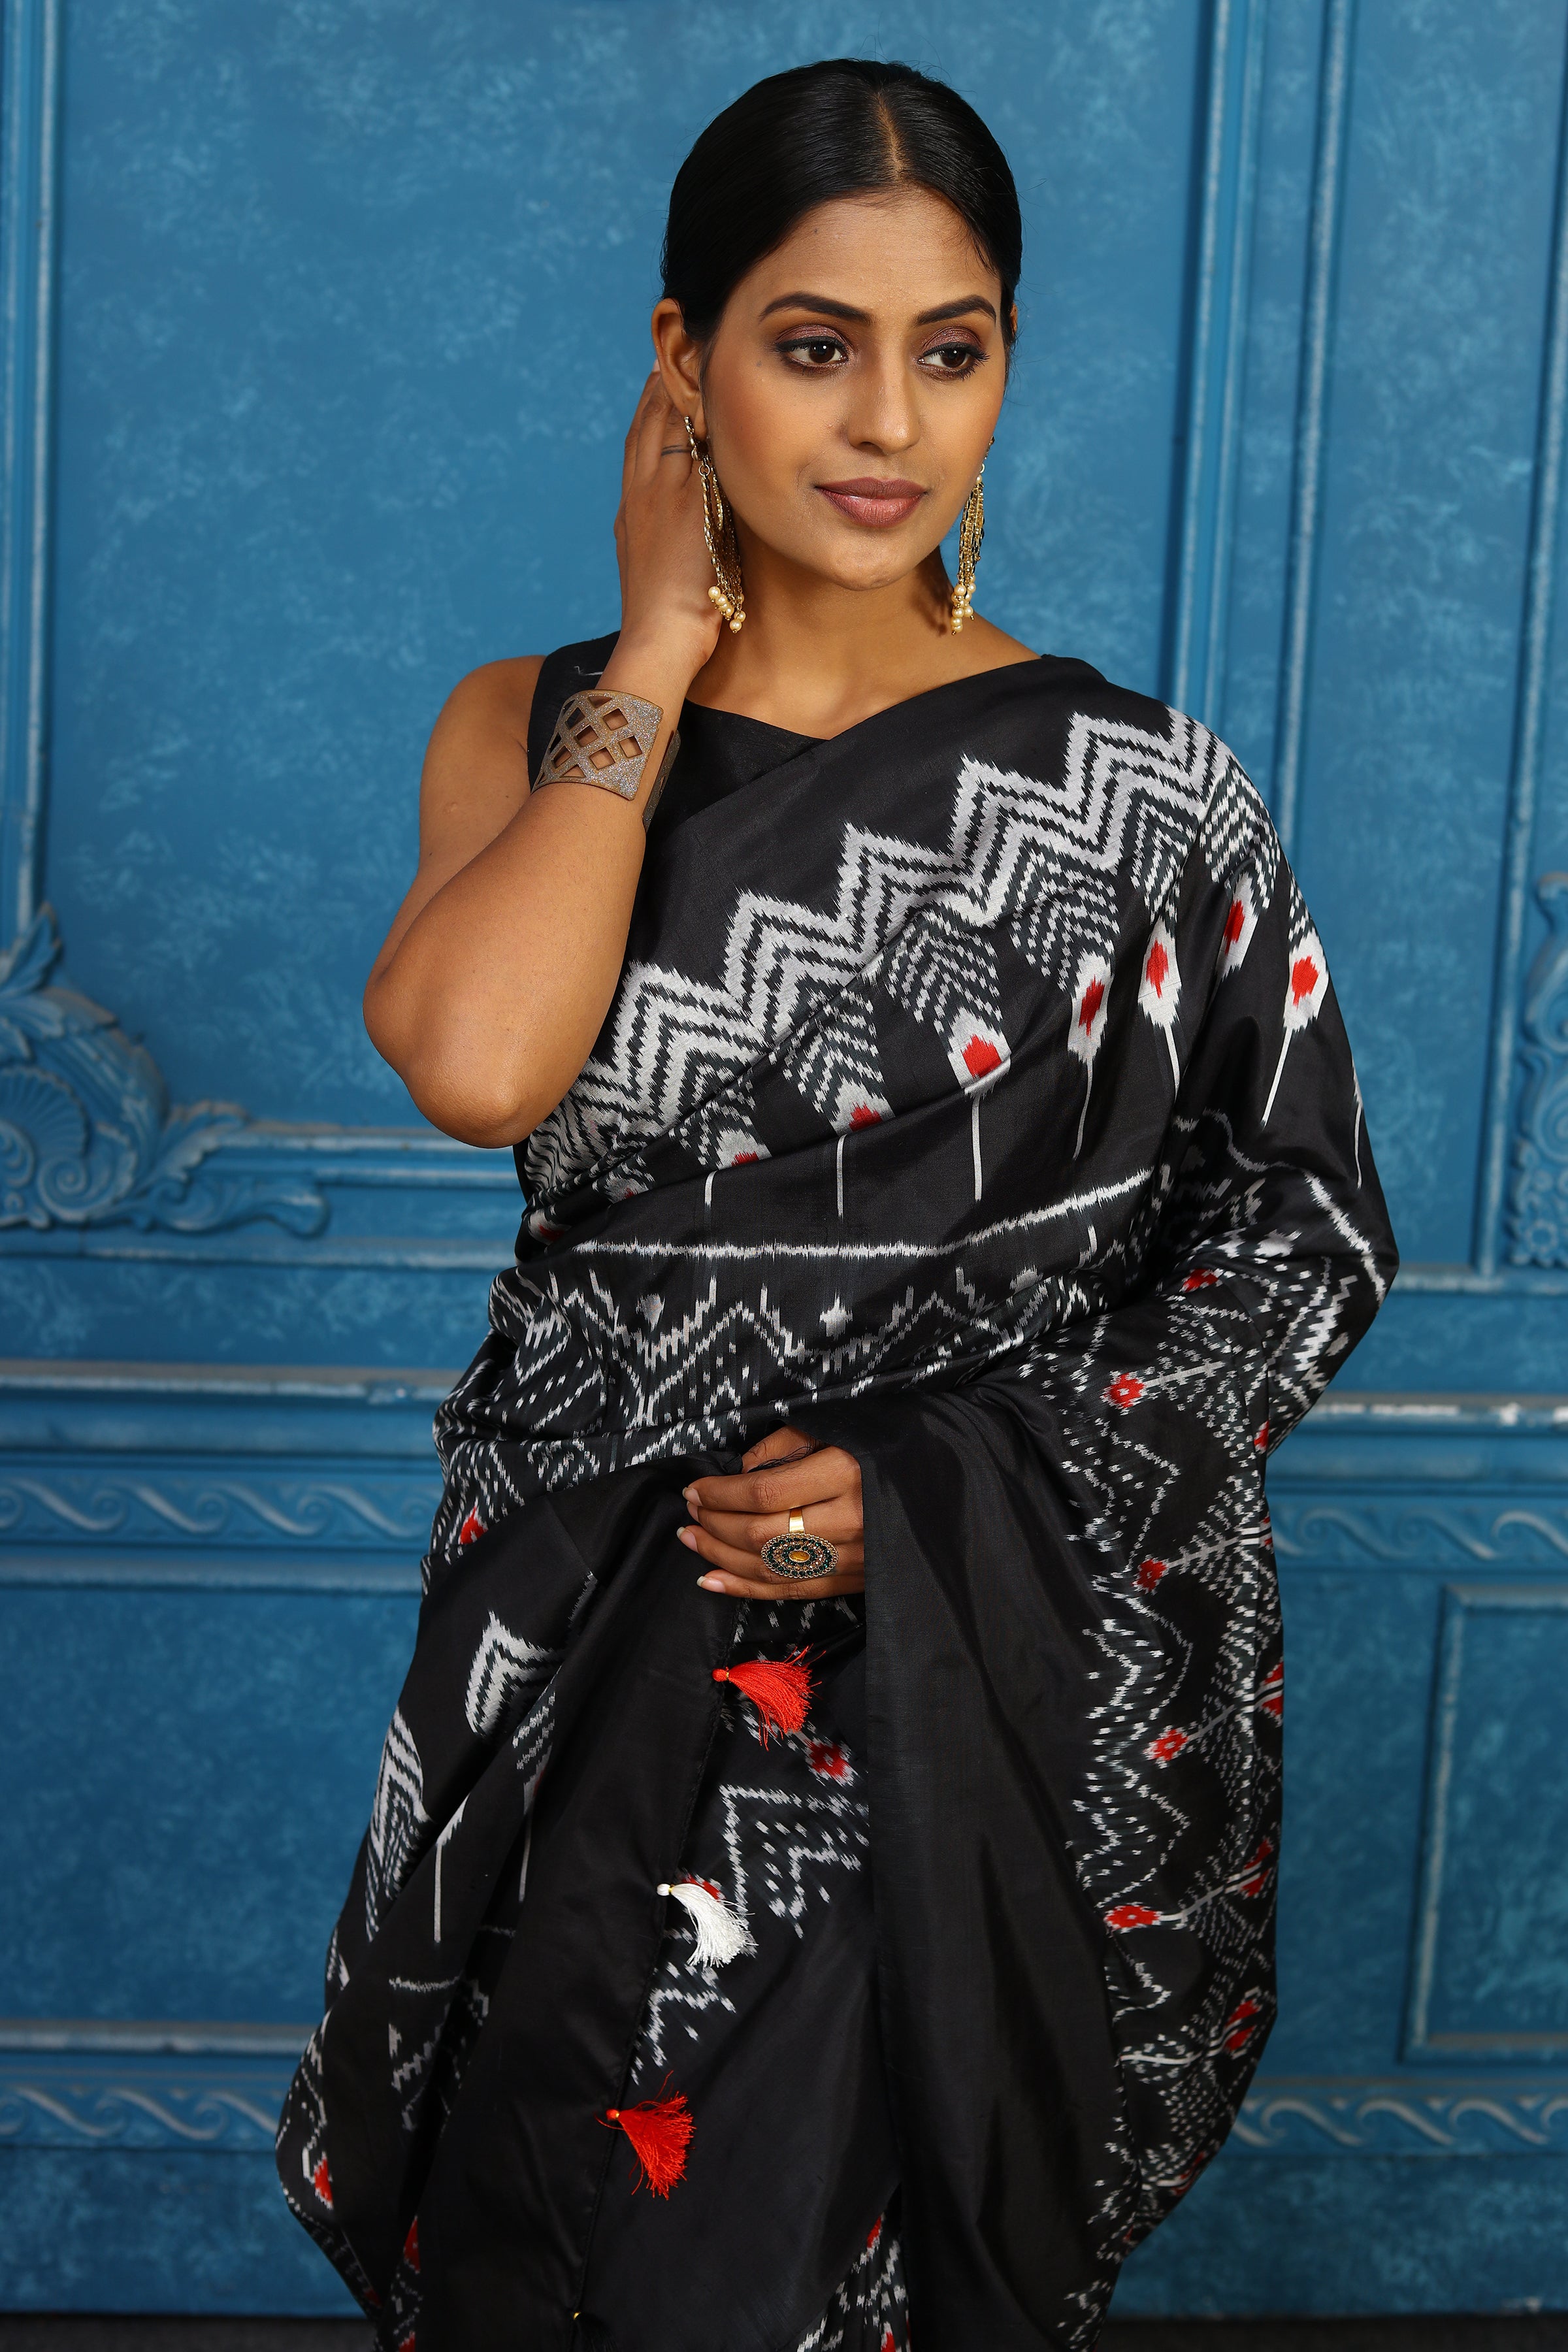 Shop black and white pochampally silk ikkat sari online in USA. Look your best on festive occasions in latest designer sarees, pure silk sarees, Kanchipuram sarees, handwoven sarees, tussar silk sarees, embroidered sarees from Pure Elegance Indian clothing store in USA.-closeup